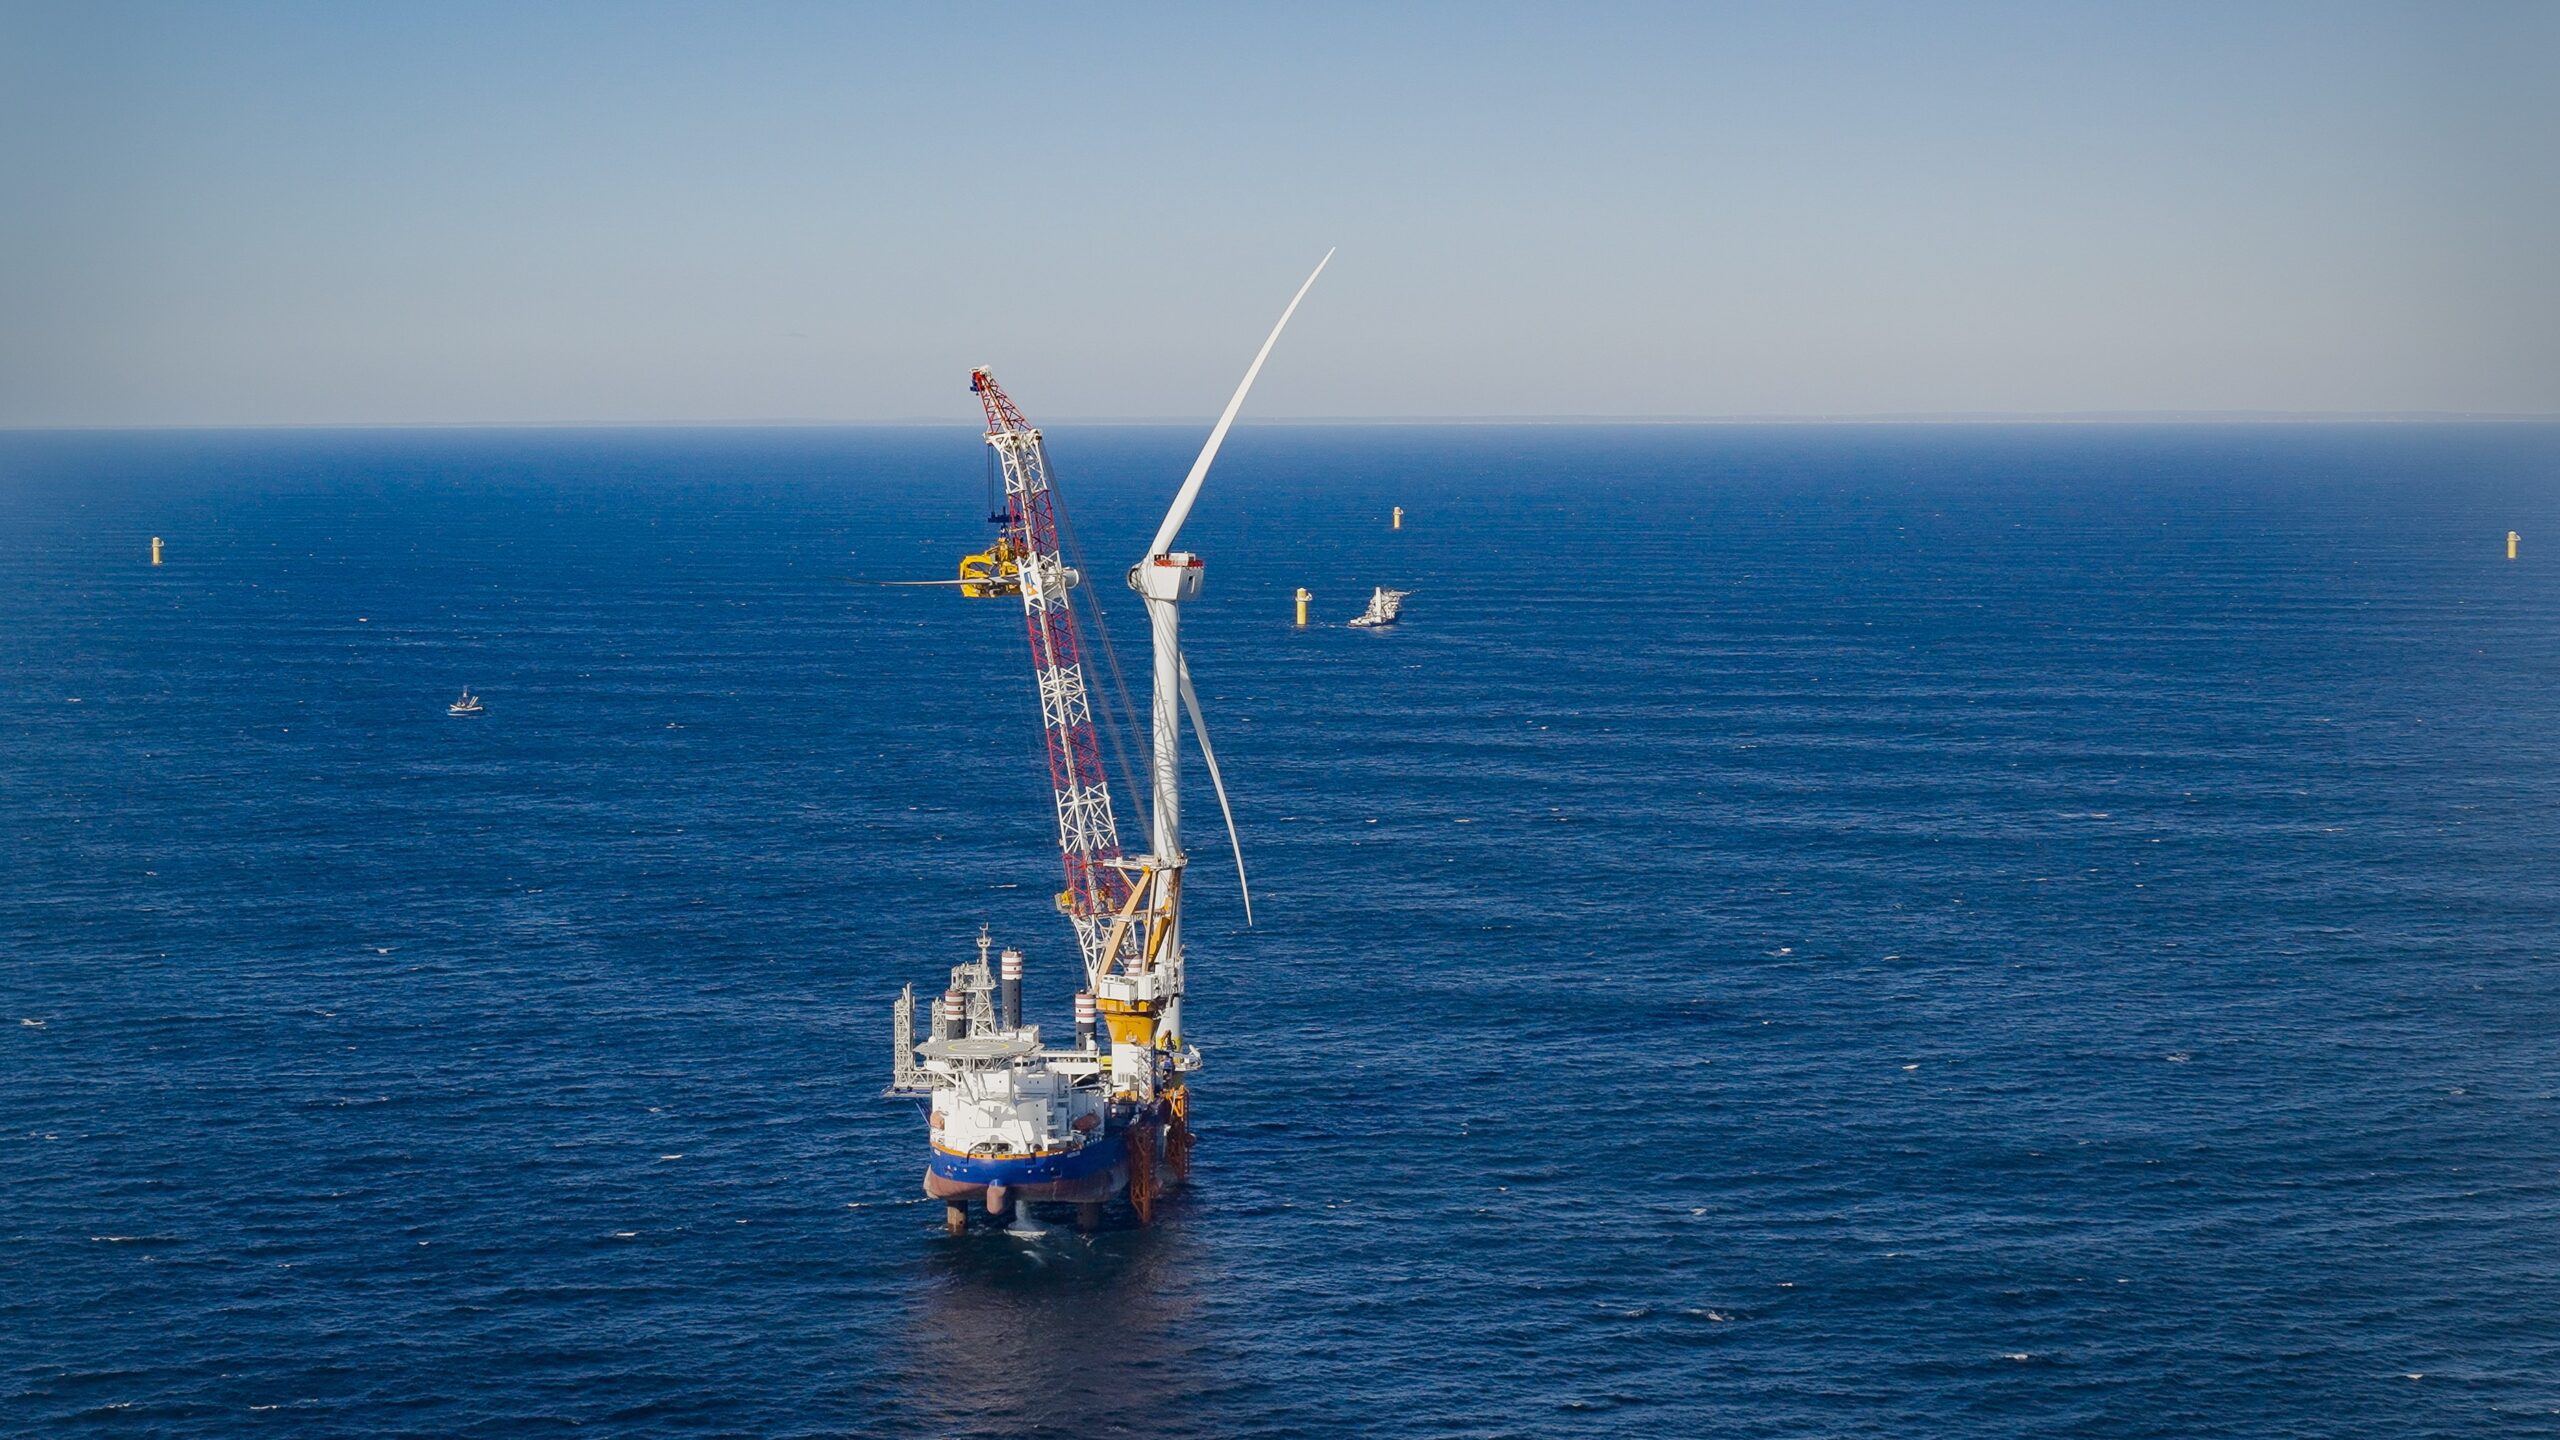 Transocean Secures Offshore Drilling Contract in the Black Sea for $465,000 Per Day